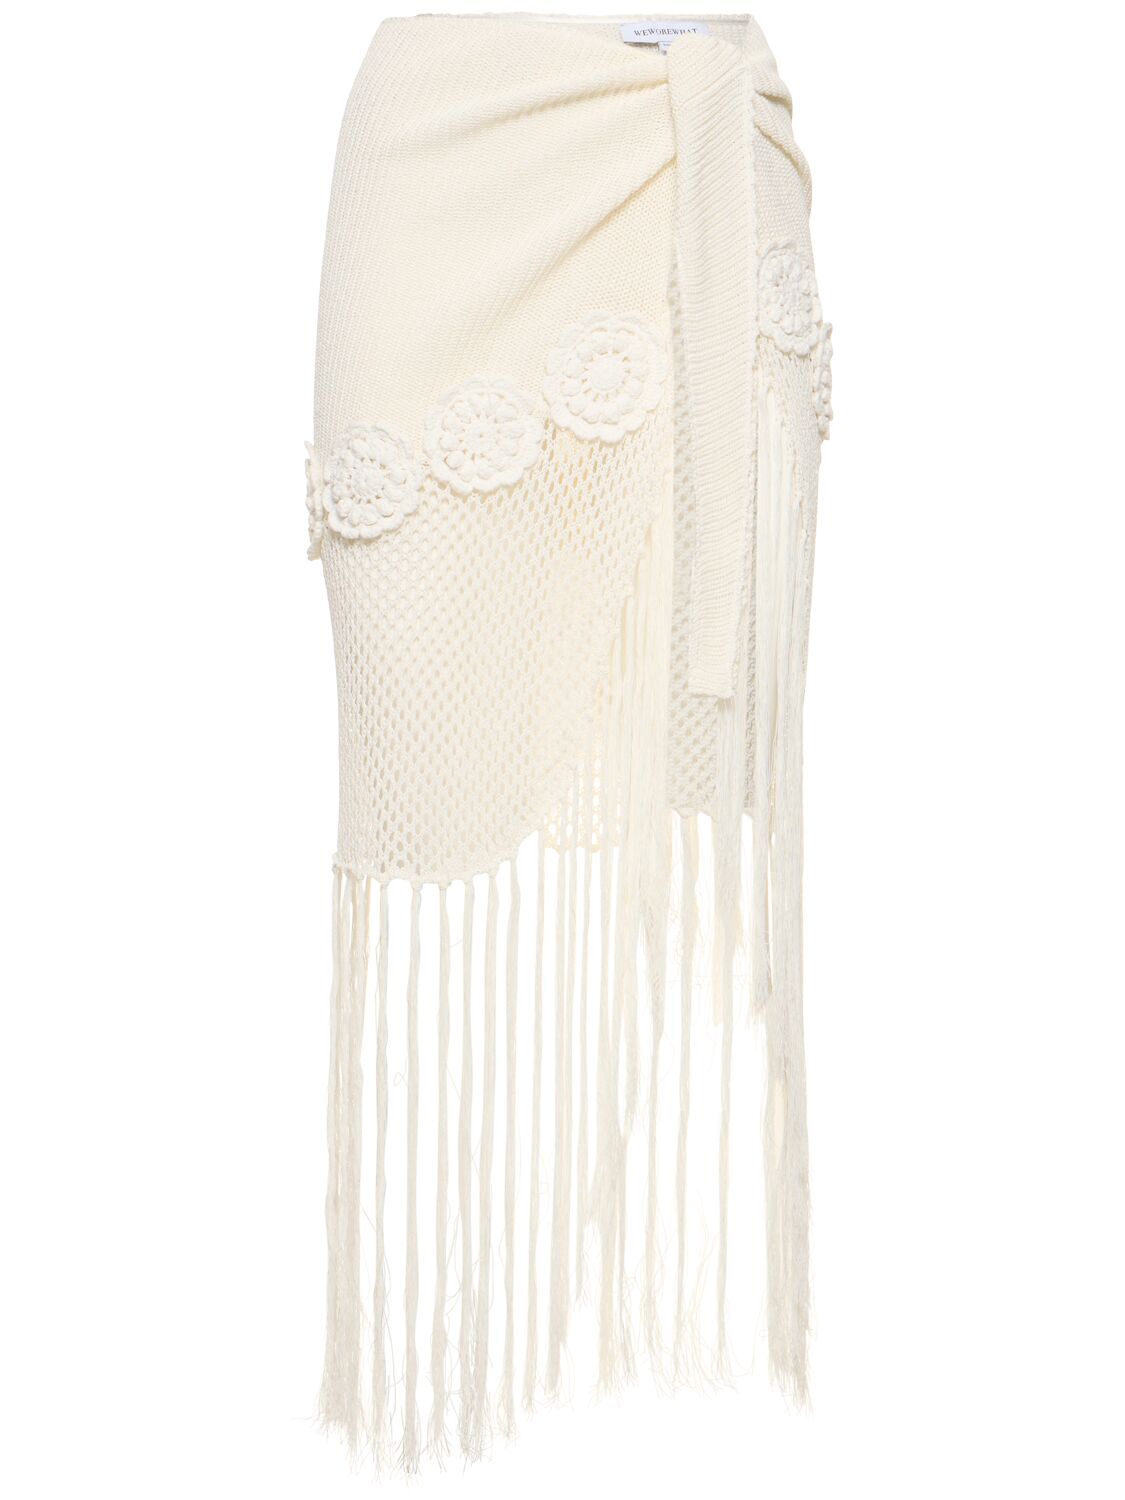 Image of Fringed Crochet Cotton Blend Sarong